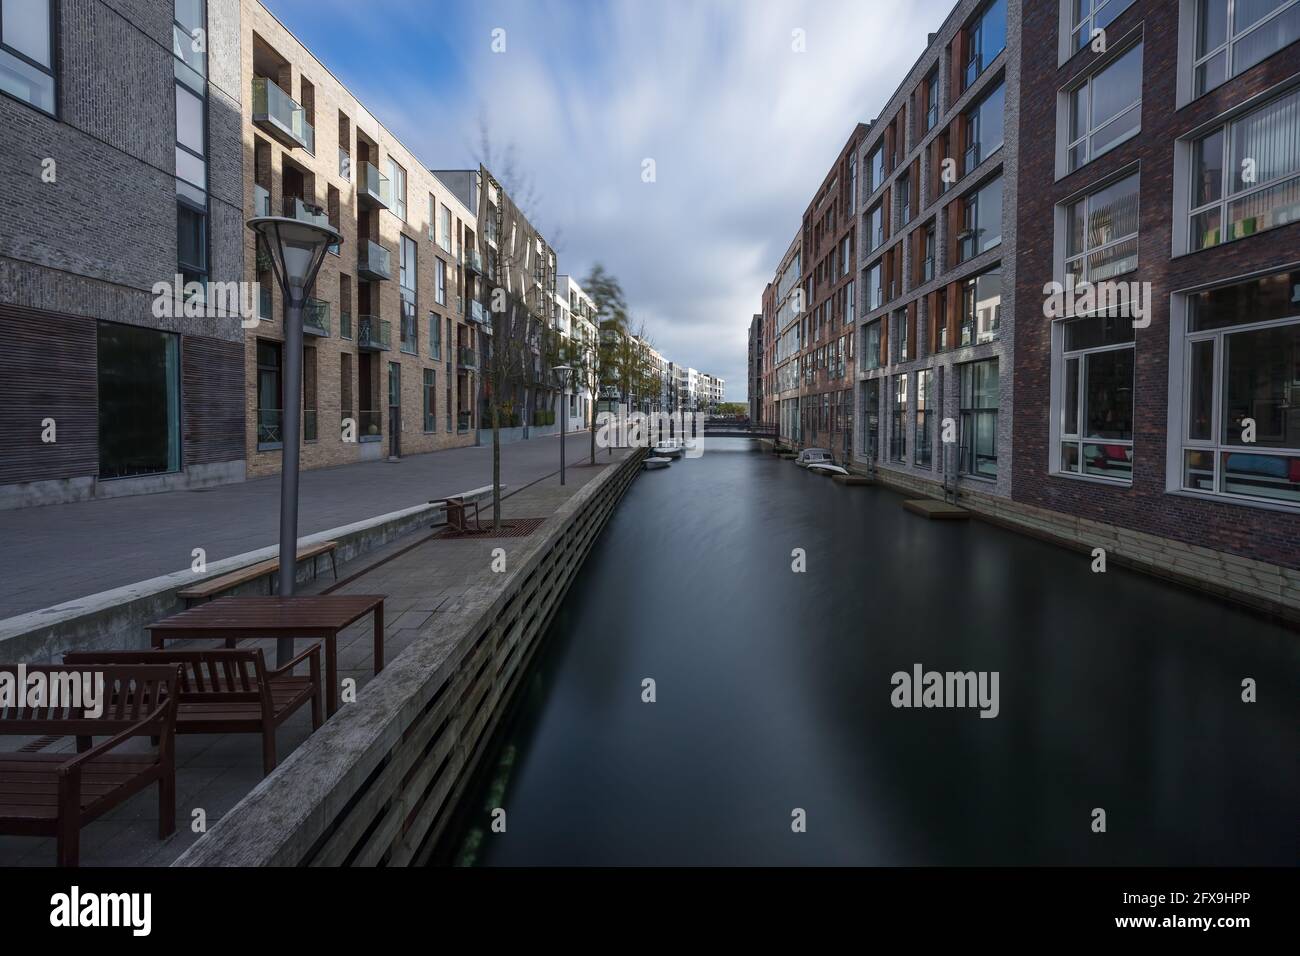 A canal in Sluseholmen a newly built apartment area in Copenhagen with water canals Stock Photo